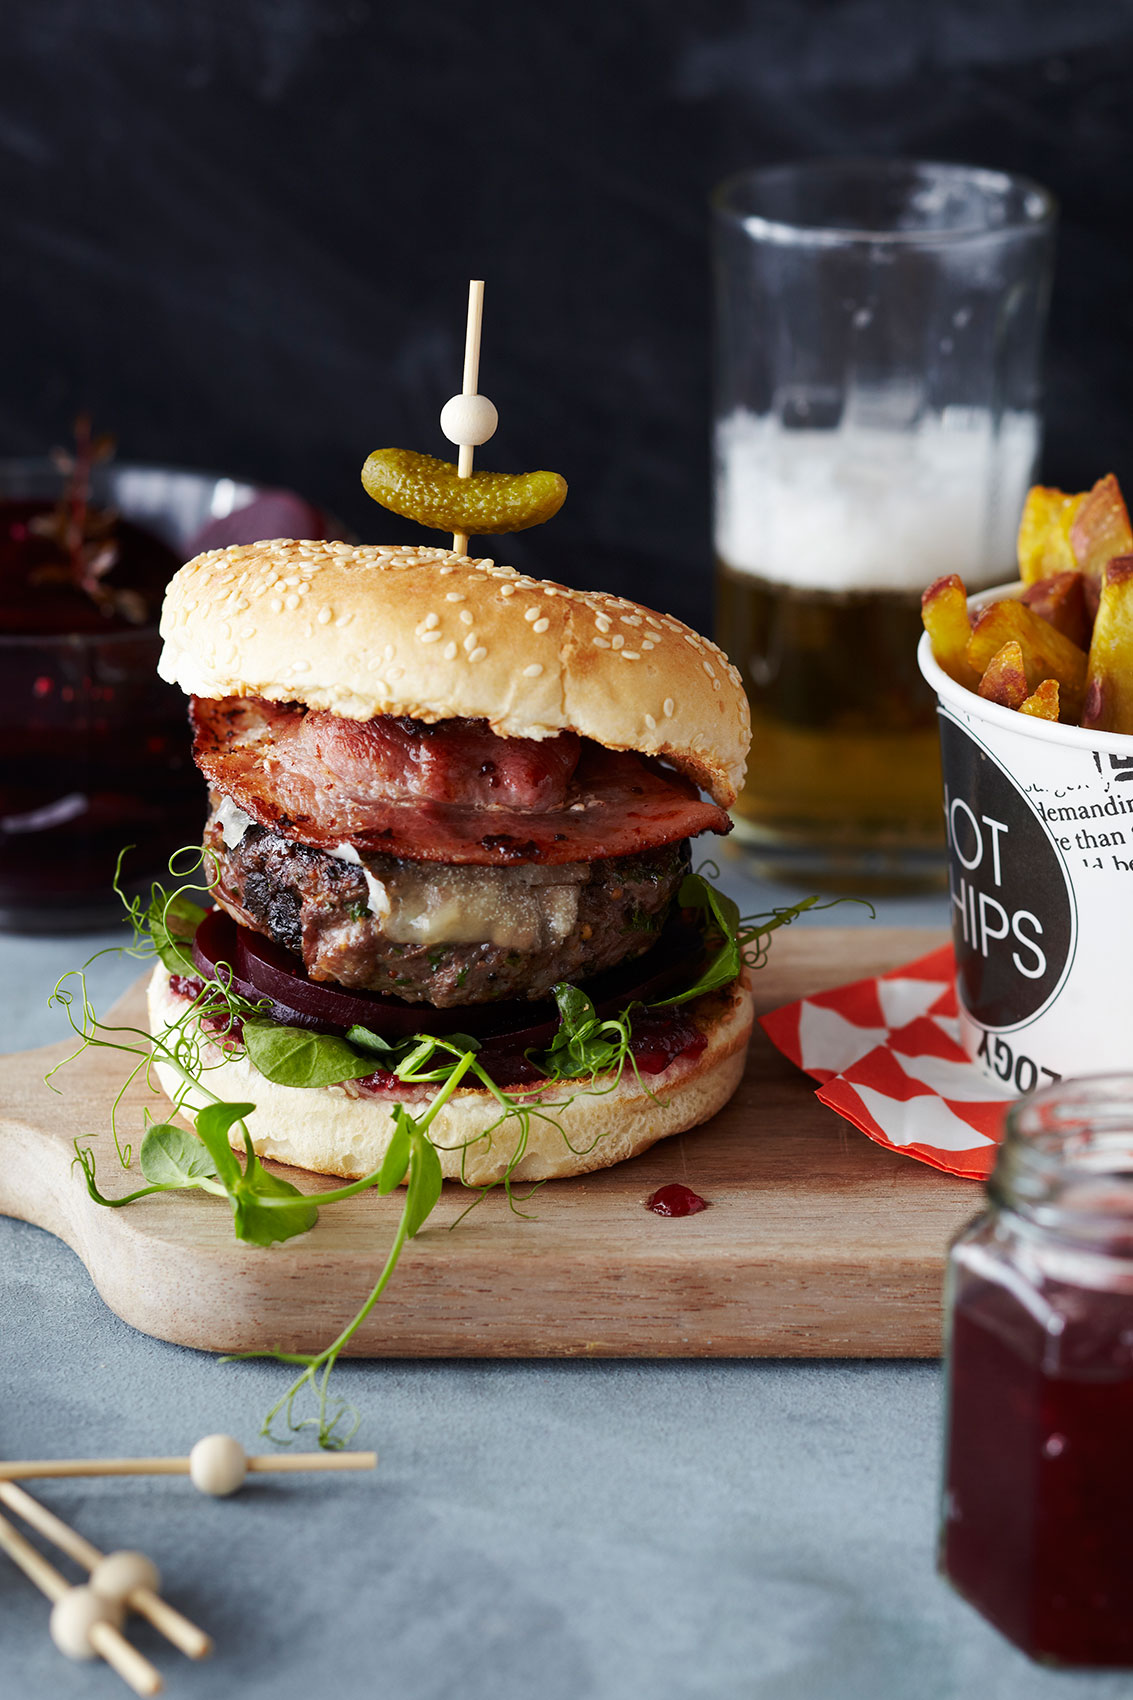 Venison Burger & Fries • Advertising & Editorial Food Photography